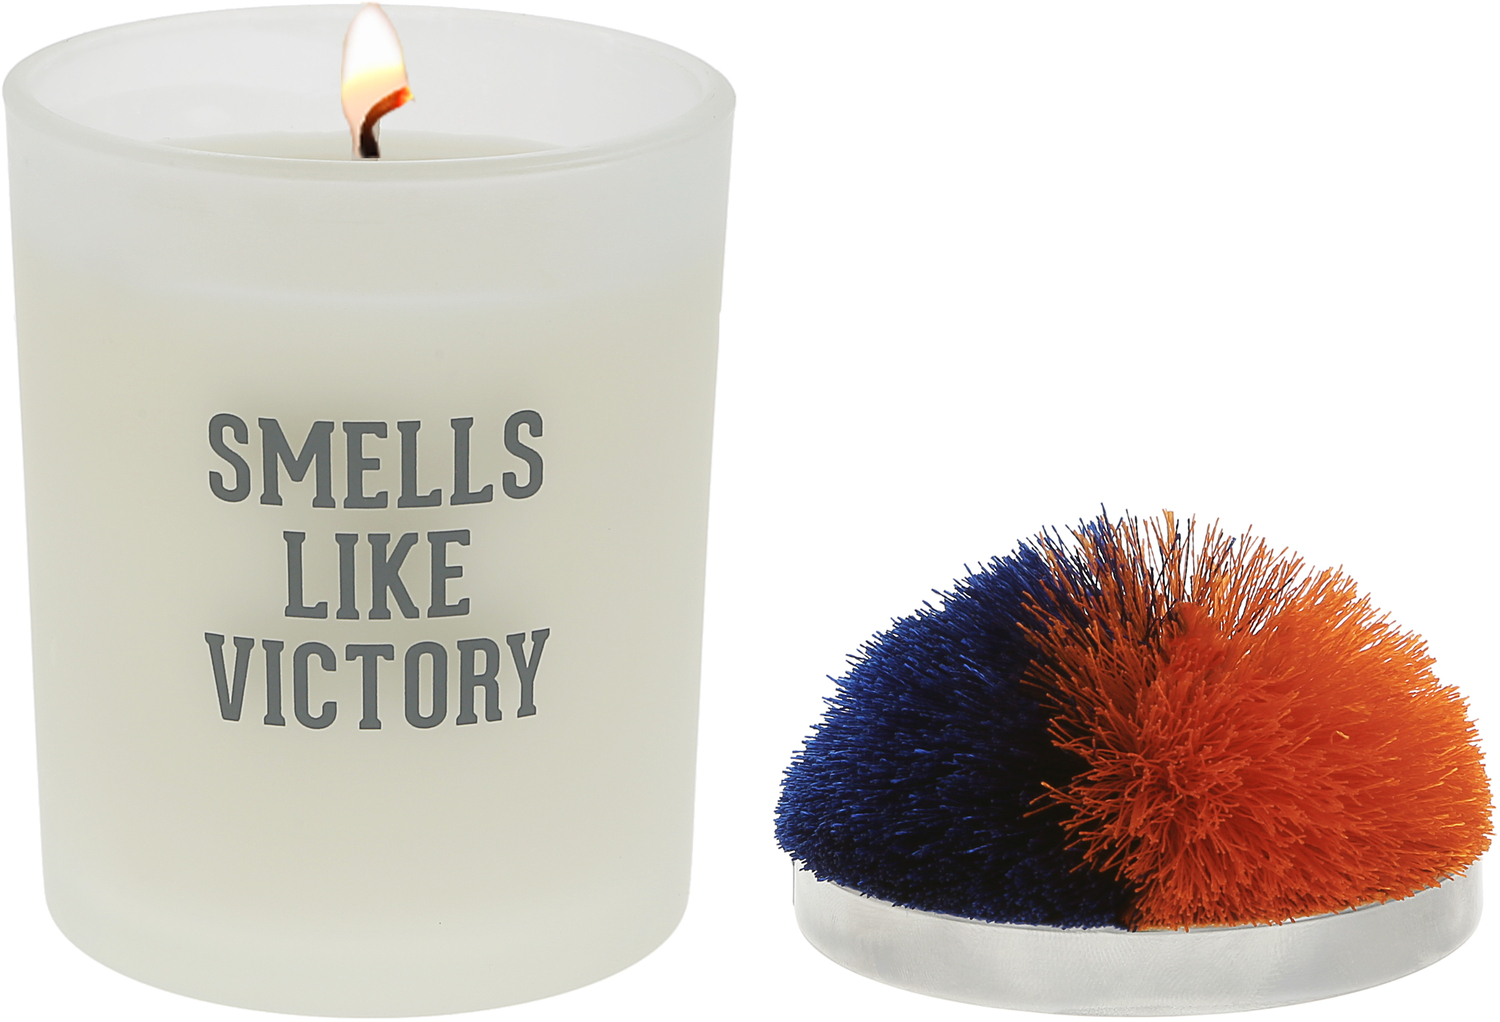 Victory - Blue & Orange by Repre-Scent - Victory - Blue & Orange - 5.5 oz - 100% Soy Wax Candle with Pom Pom Lid
Scent: Tranquility